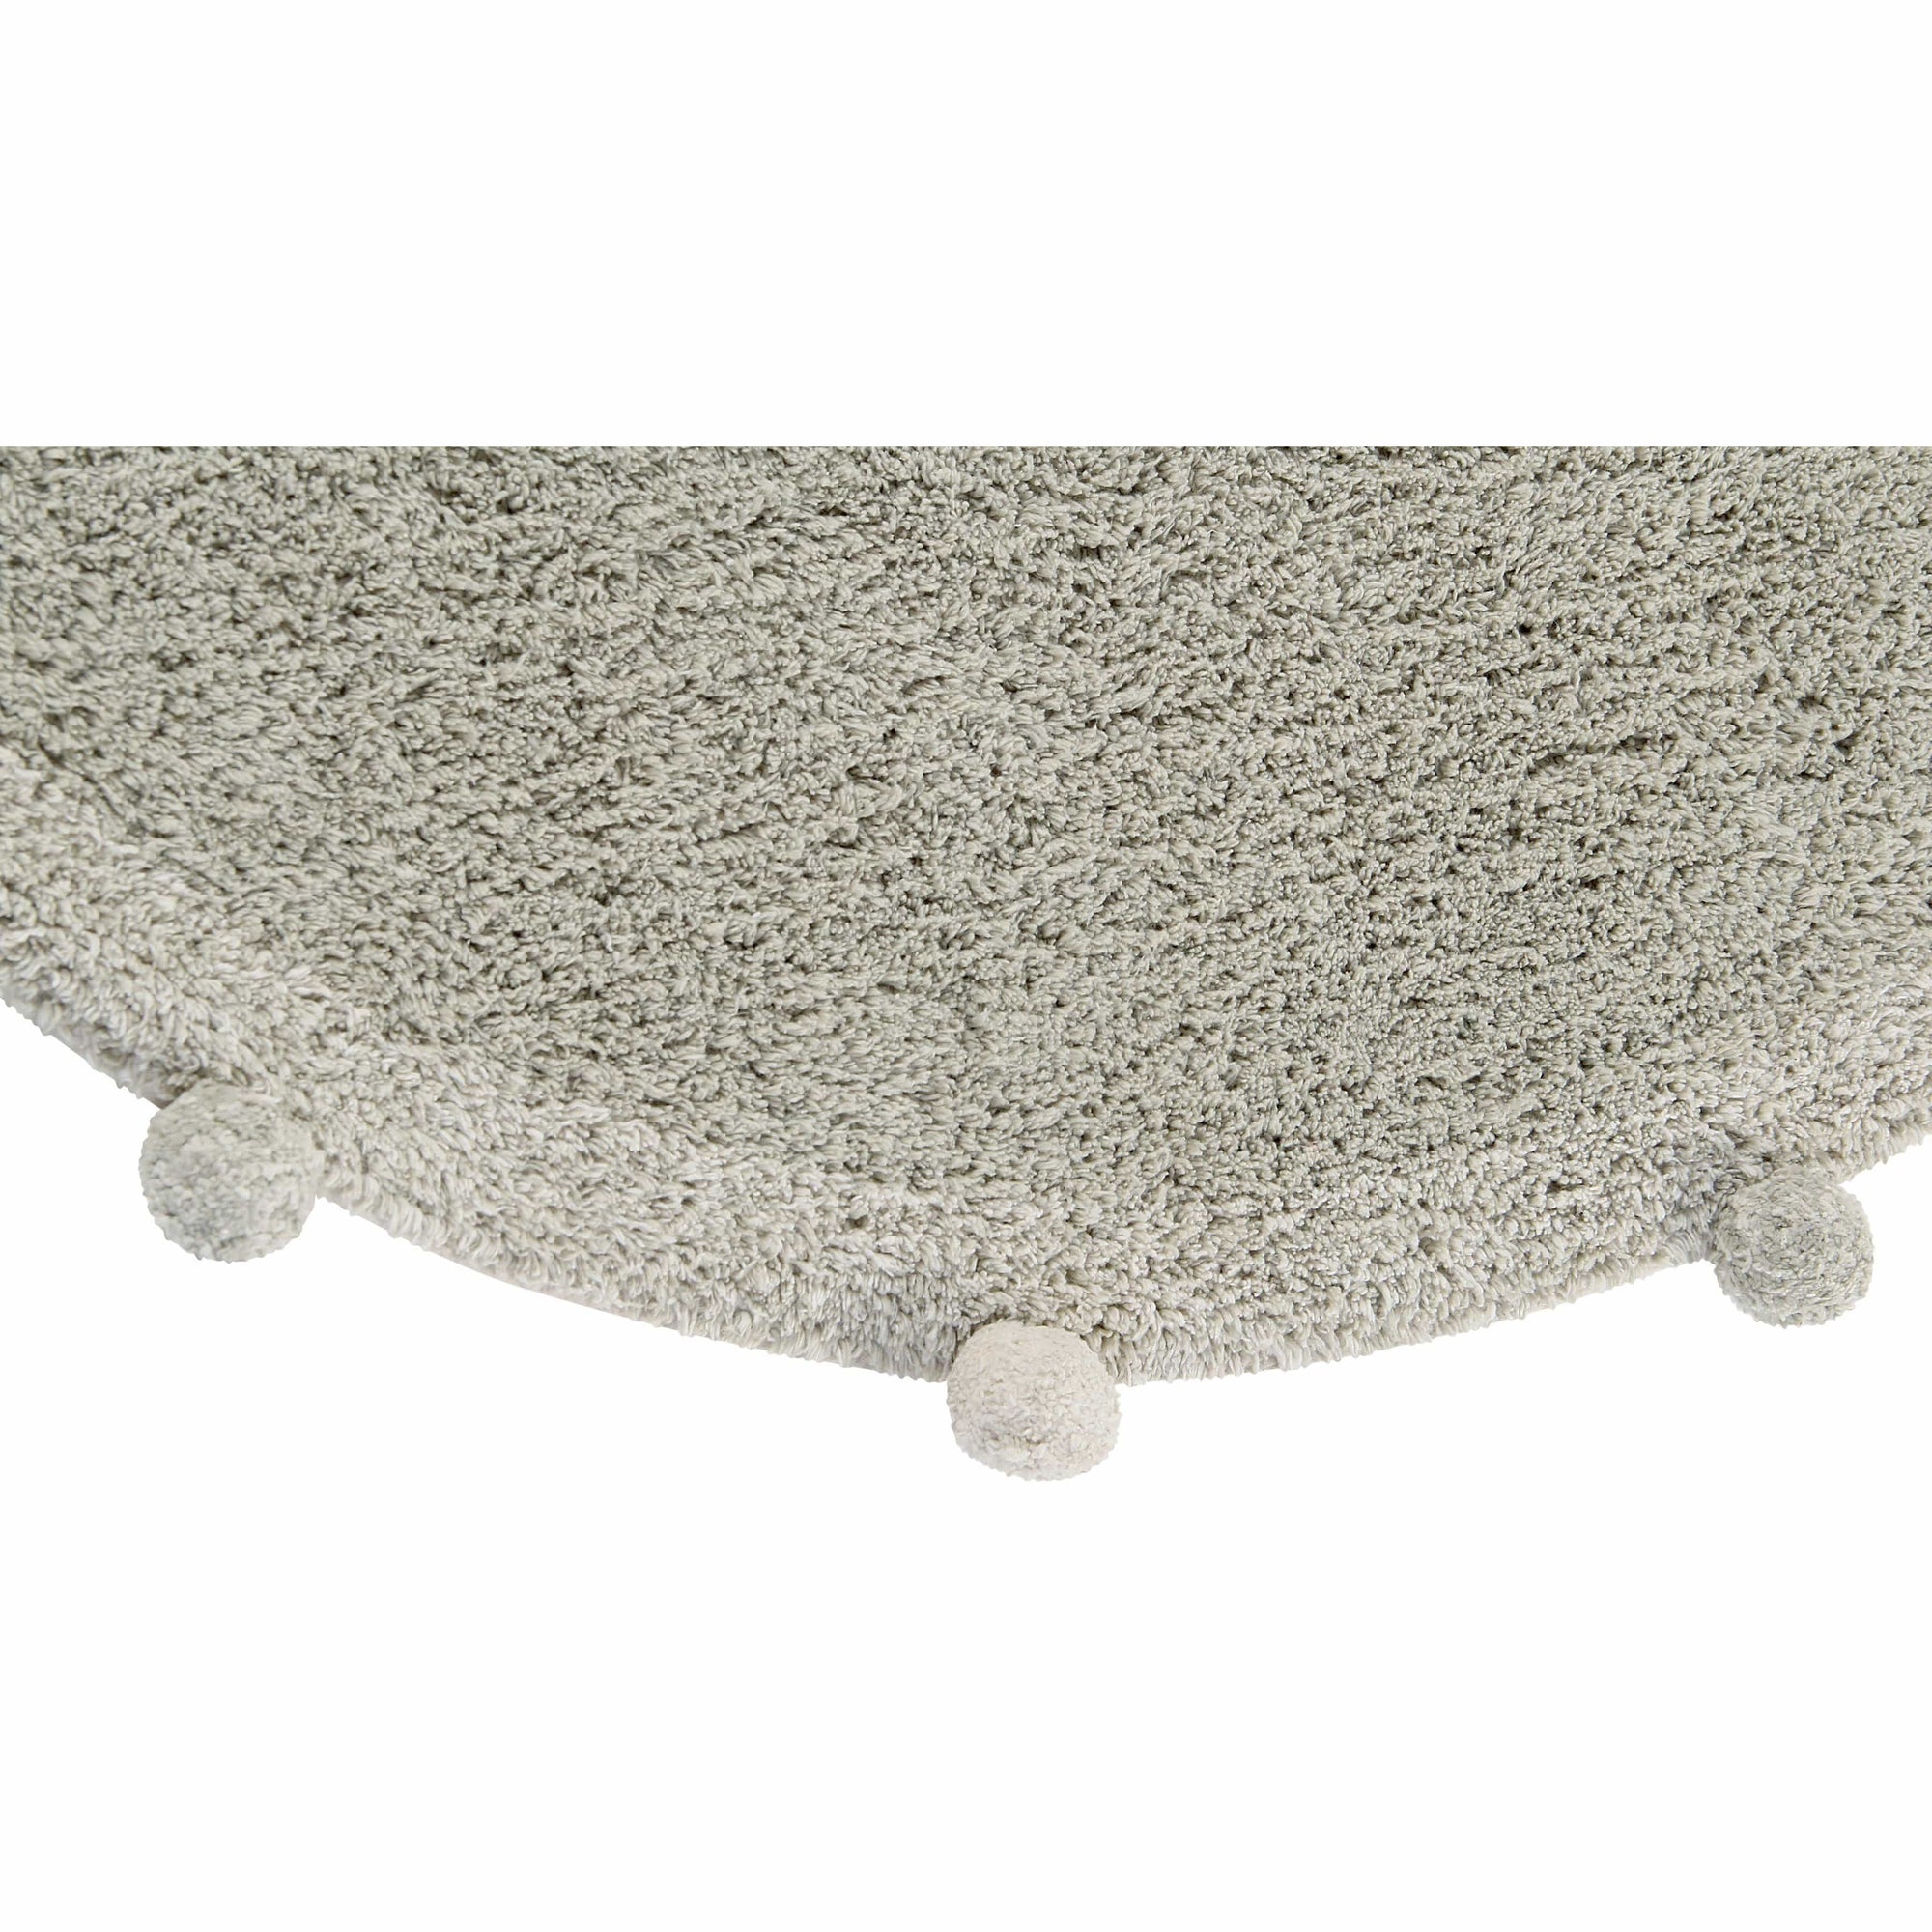 Rugs by Roo | Lorena Canals Bubbly Natural Olive Washable Area Rug-C-BUBBLY-OLV